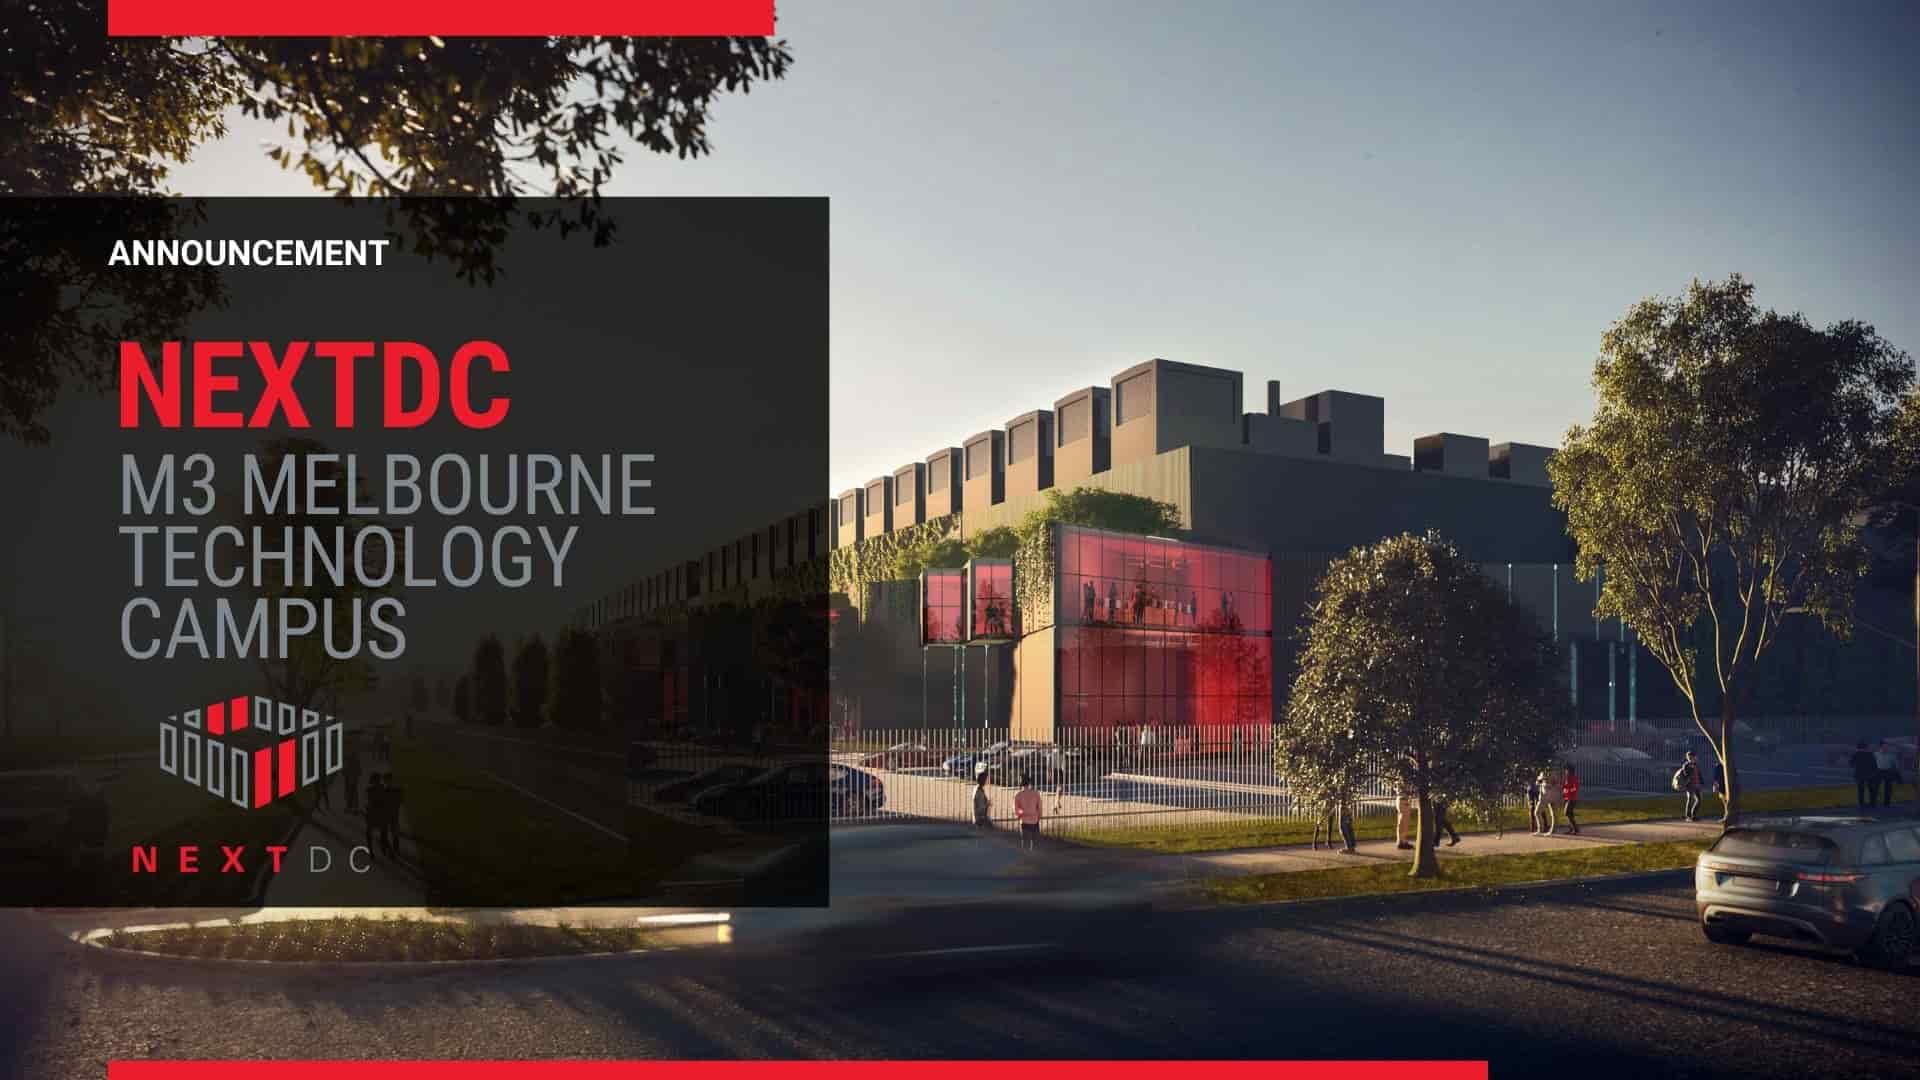 It’s all systems go for Victoria, as NEXTDC unveils plans for a 150MW hyperscale campus in Melbourne’s west.